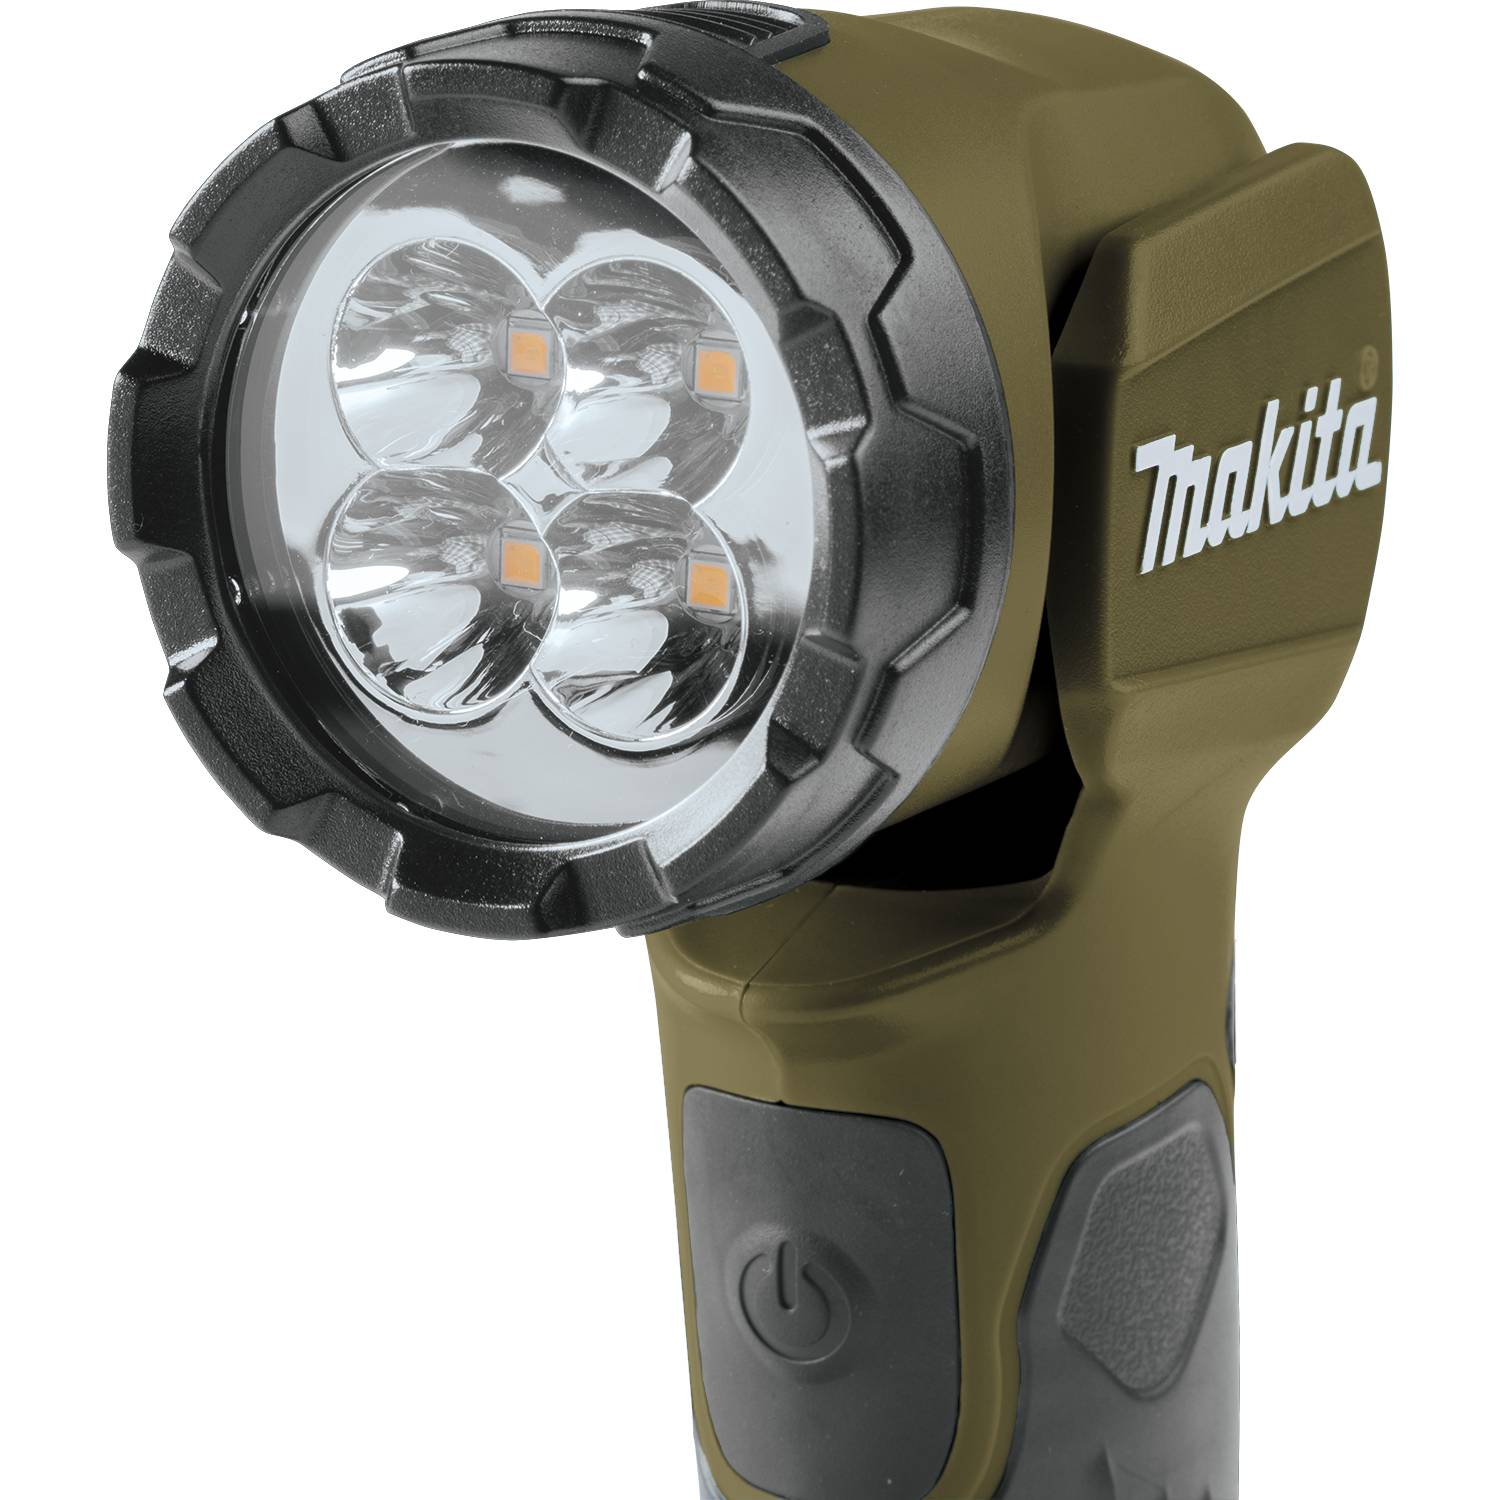 Makita ADML815 Outdoor Adventure 18V LXT Lithium-Ion LED Flashlight (Tool Only)